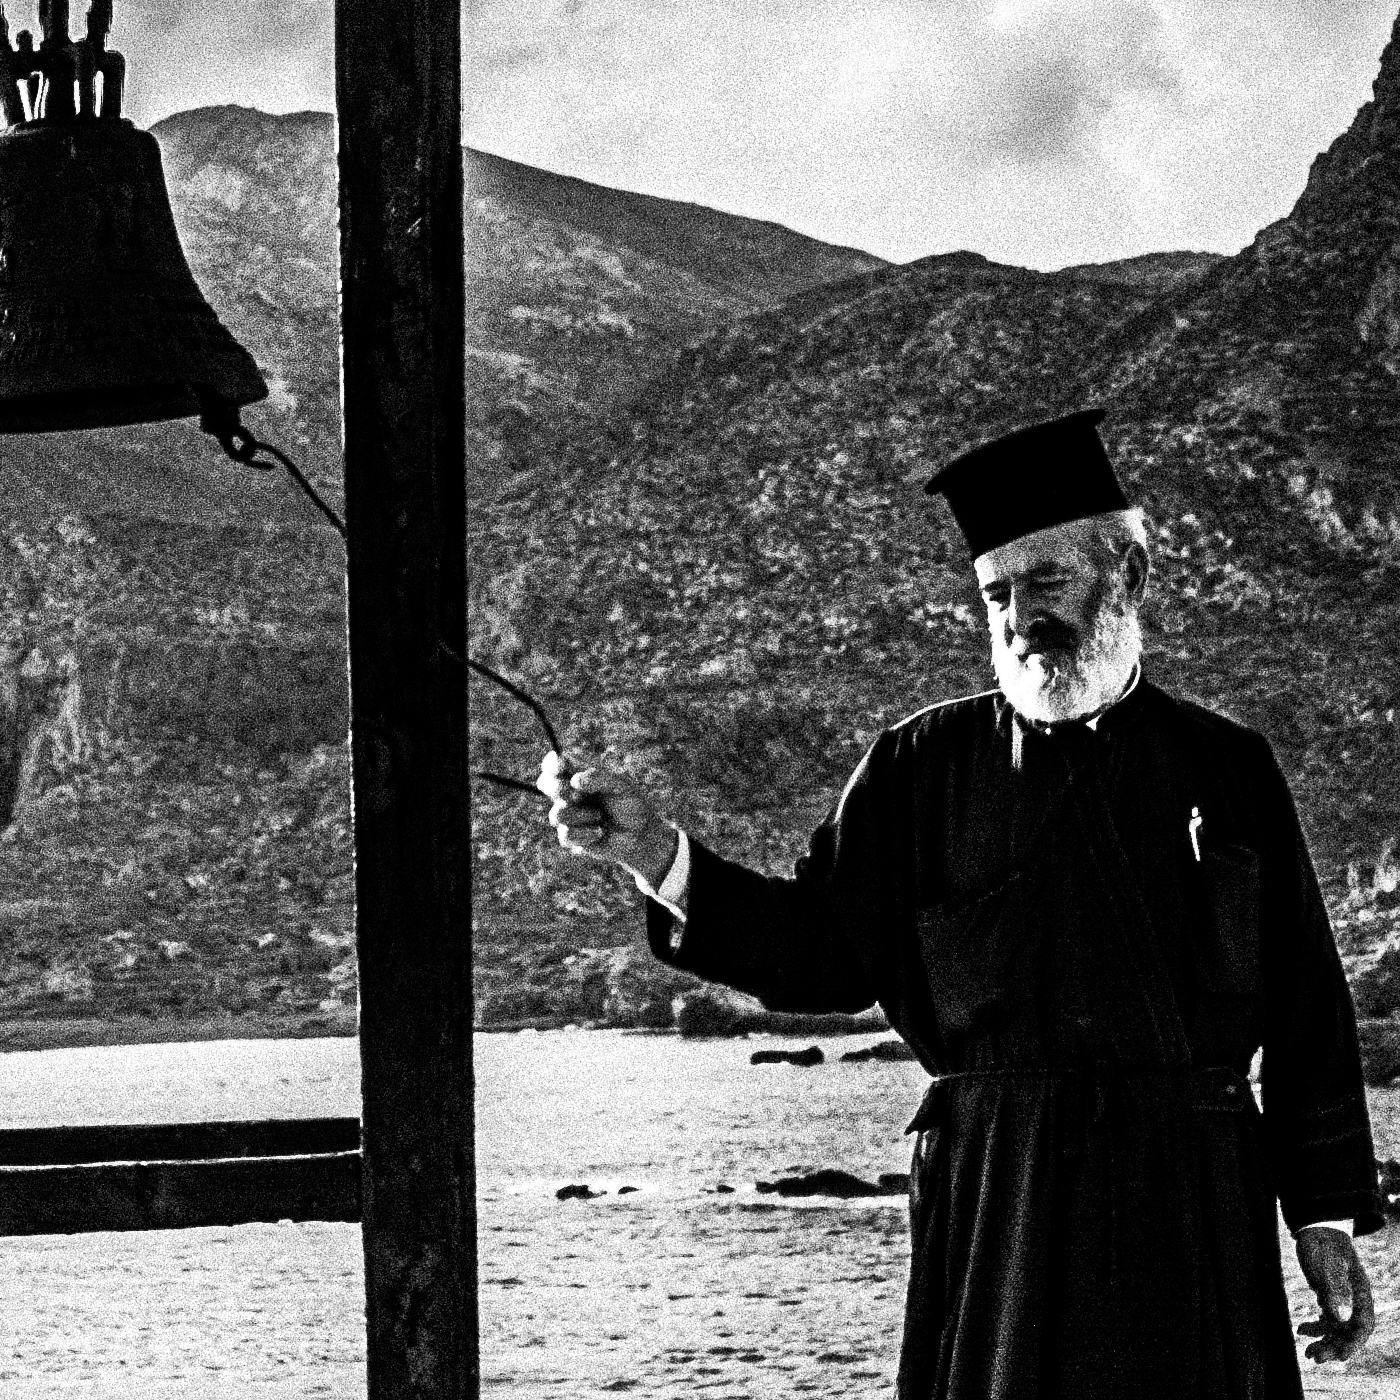 Black and White Photography Wall Art Greece | Priest striking the bell at St. John celebration in Vrykounta Olympos Karpathos Dodecanese by George Tatakis - detailed view